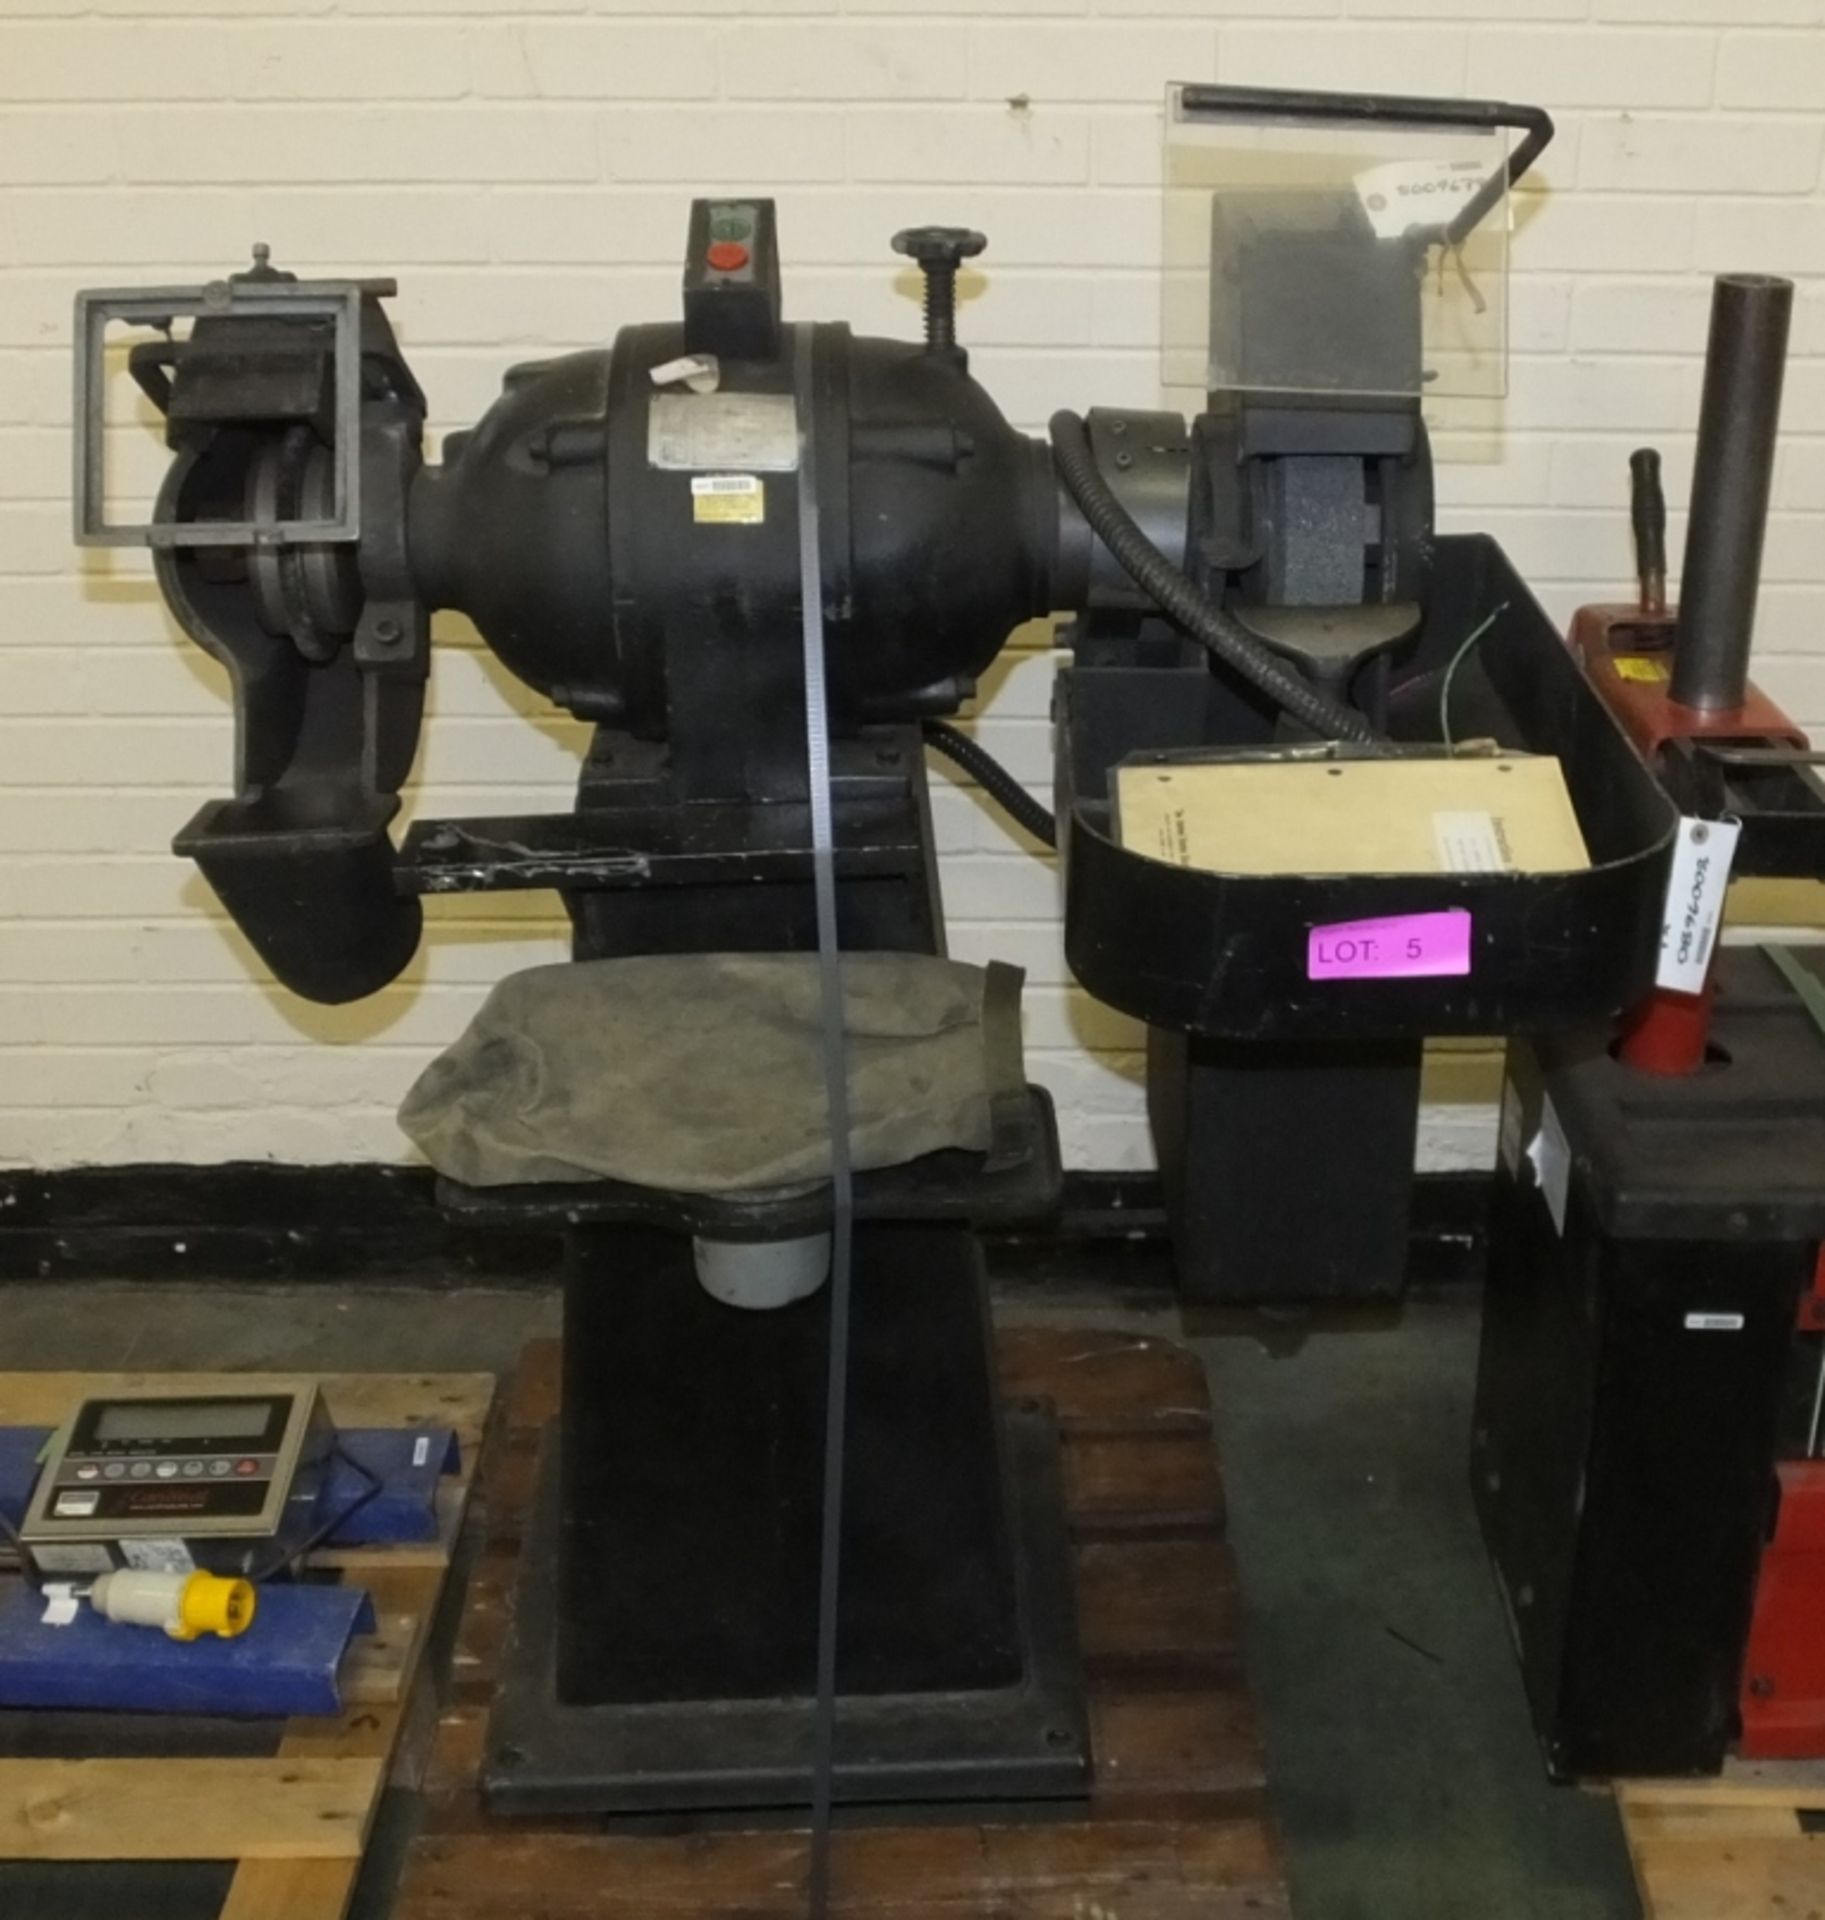 U.S.E 10WG Wet-Dry Grinding Machine 220V - £5+VAT lift out charge applied to this lot